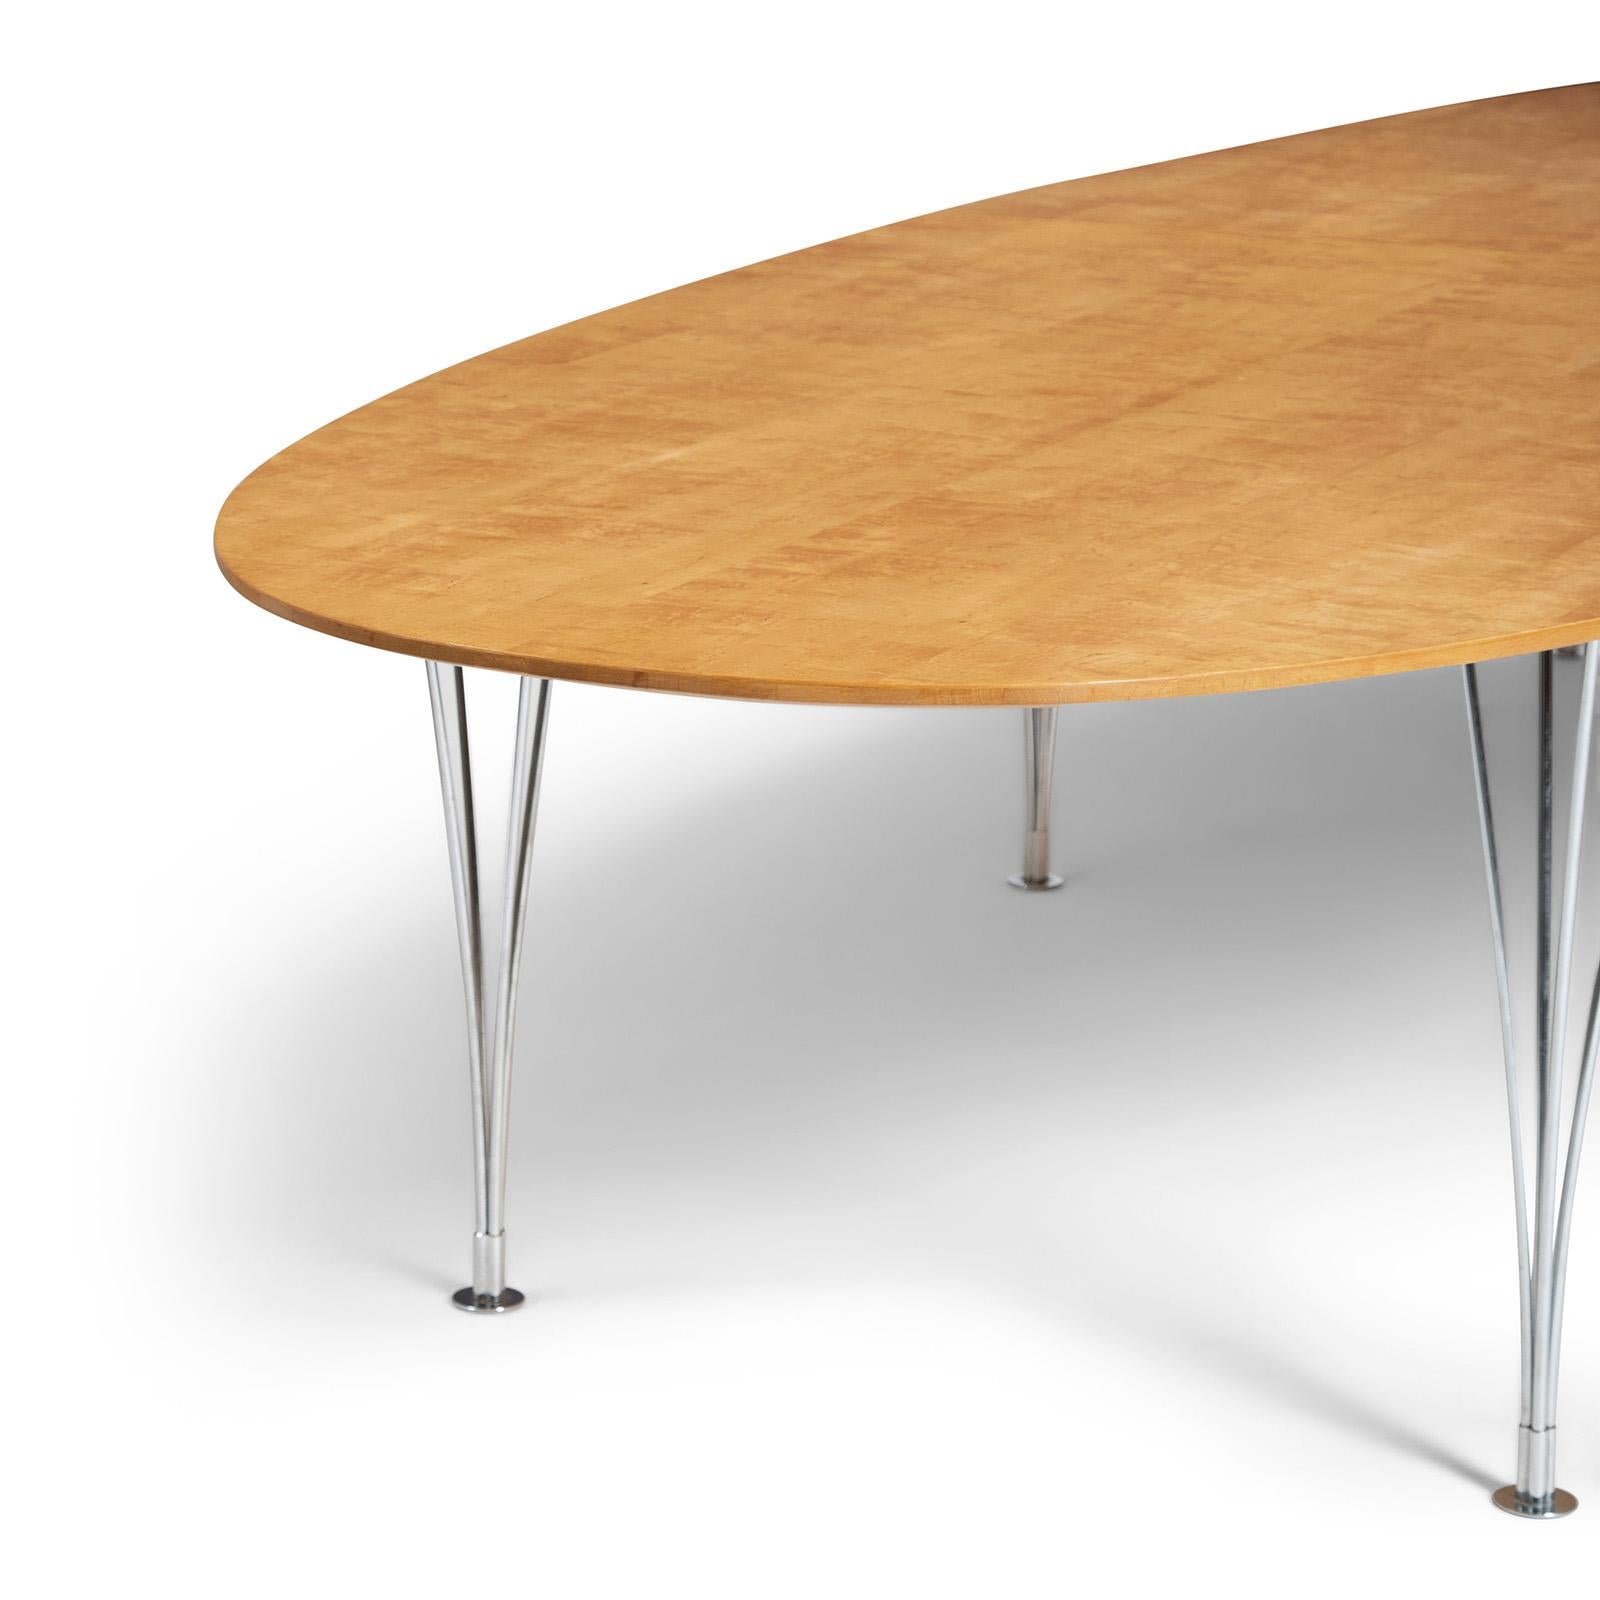 The super-ellipse table with top in Karelian birch with chrome-plated spring steel legs.
Designed in a close collaboration between Swedish architect Bruno Mathsson and Danish designer Piet Hein. The model was first exhibited at the Liljevachs